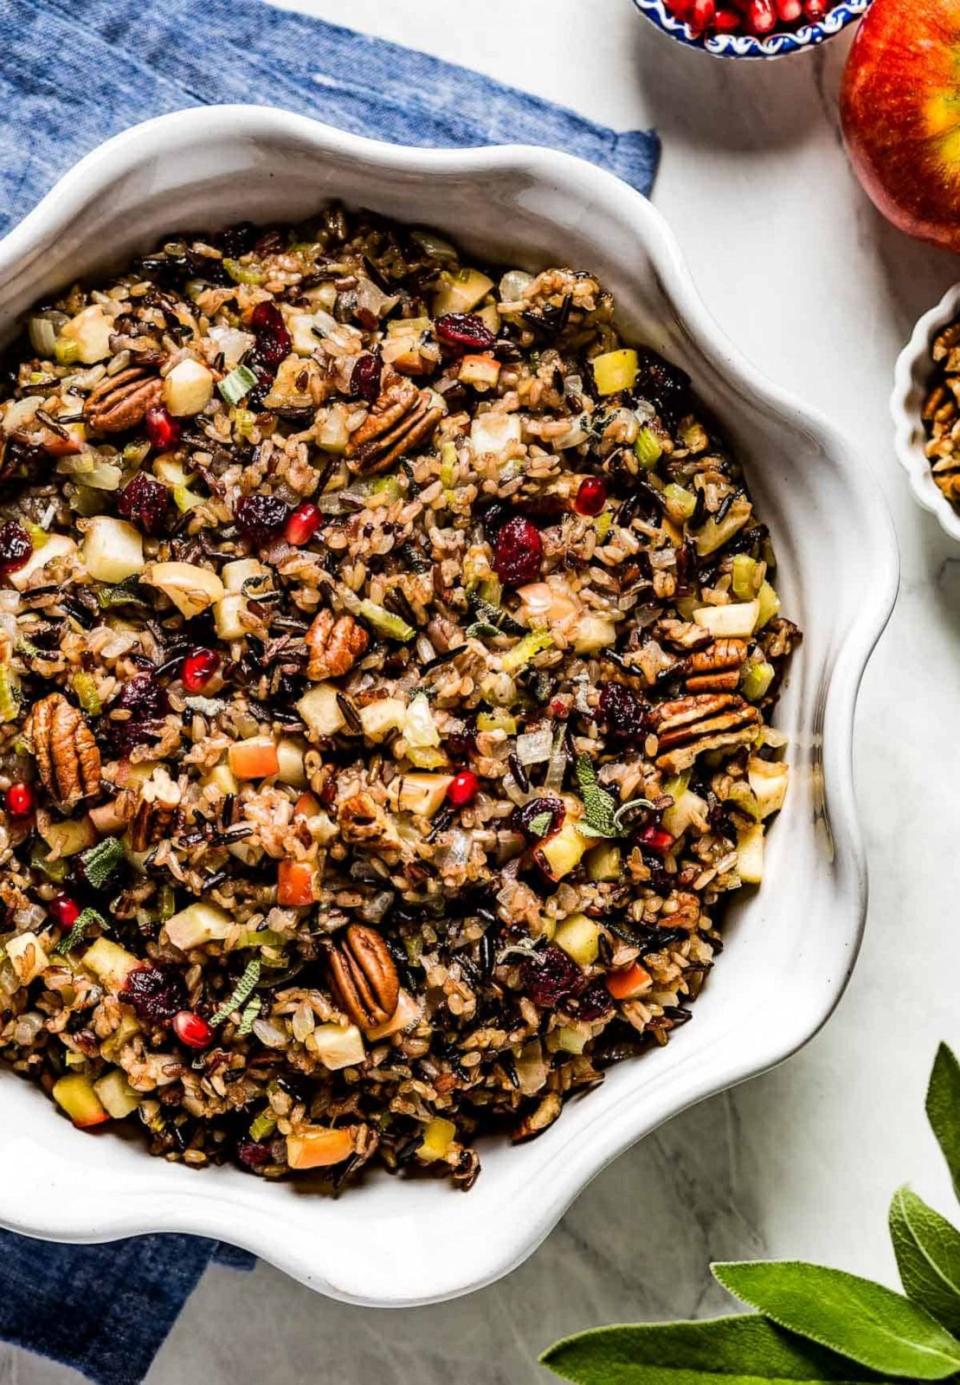 PHOTO: Wild rice stuffing is a great option to make it gluten-free. (Aysegul Sanford, Foolproof Living)